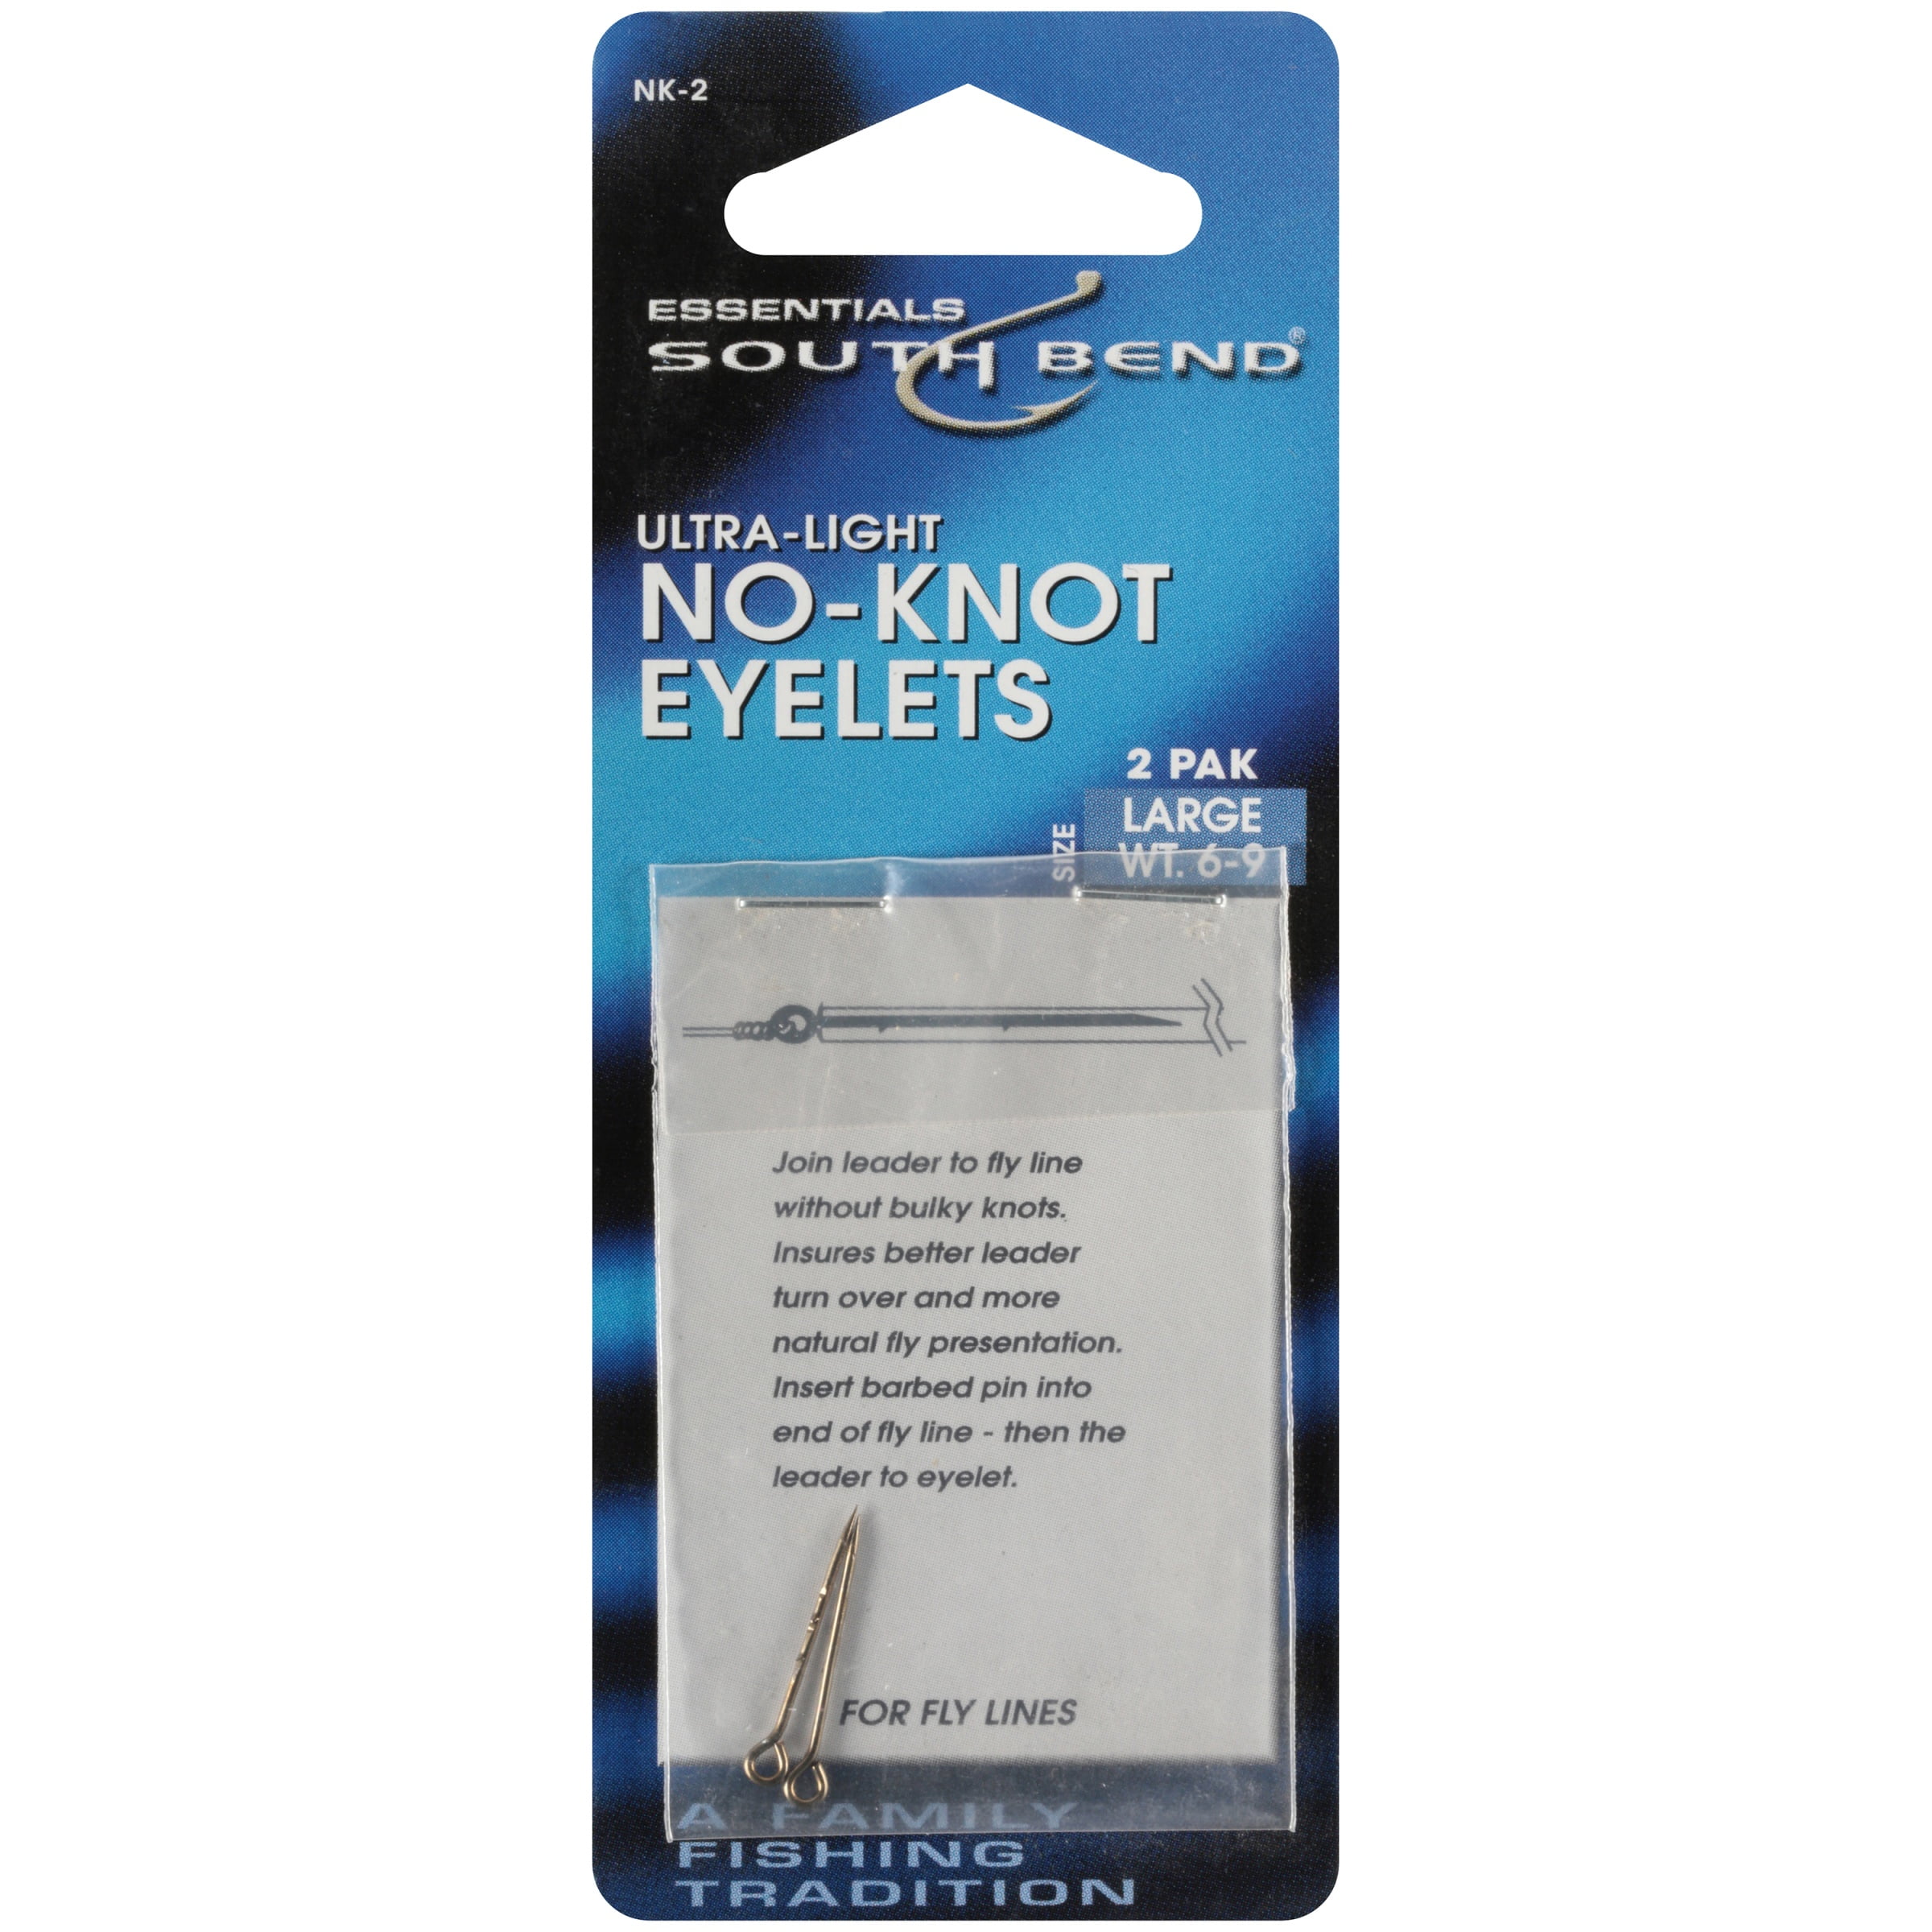 South Bend Essentials® Ultra-Light No-Knot Eyelets 2 ct Pack 